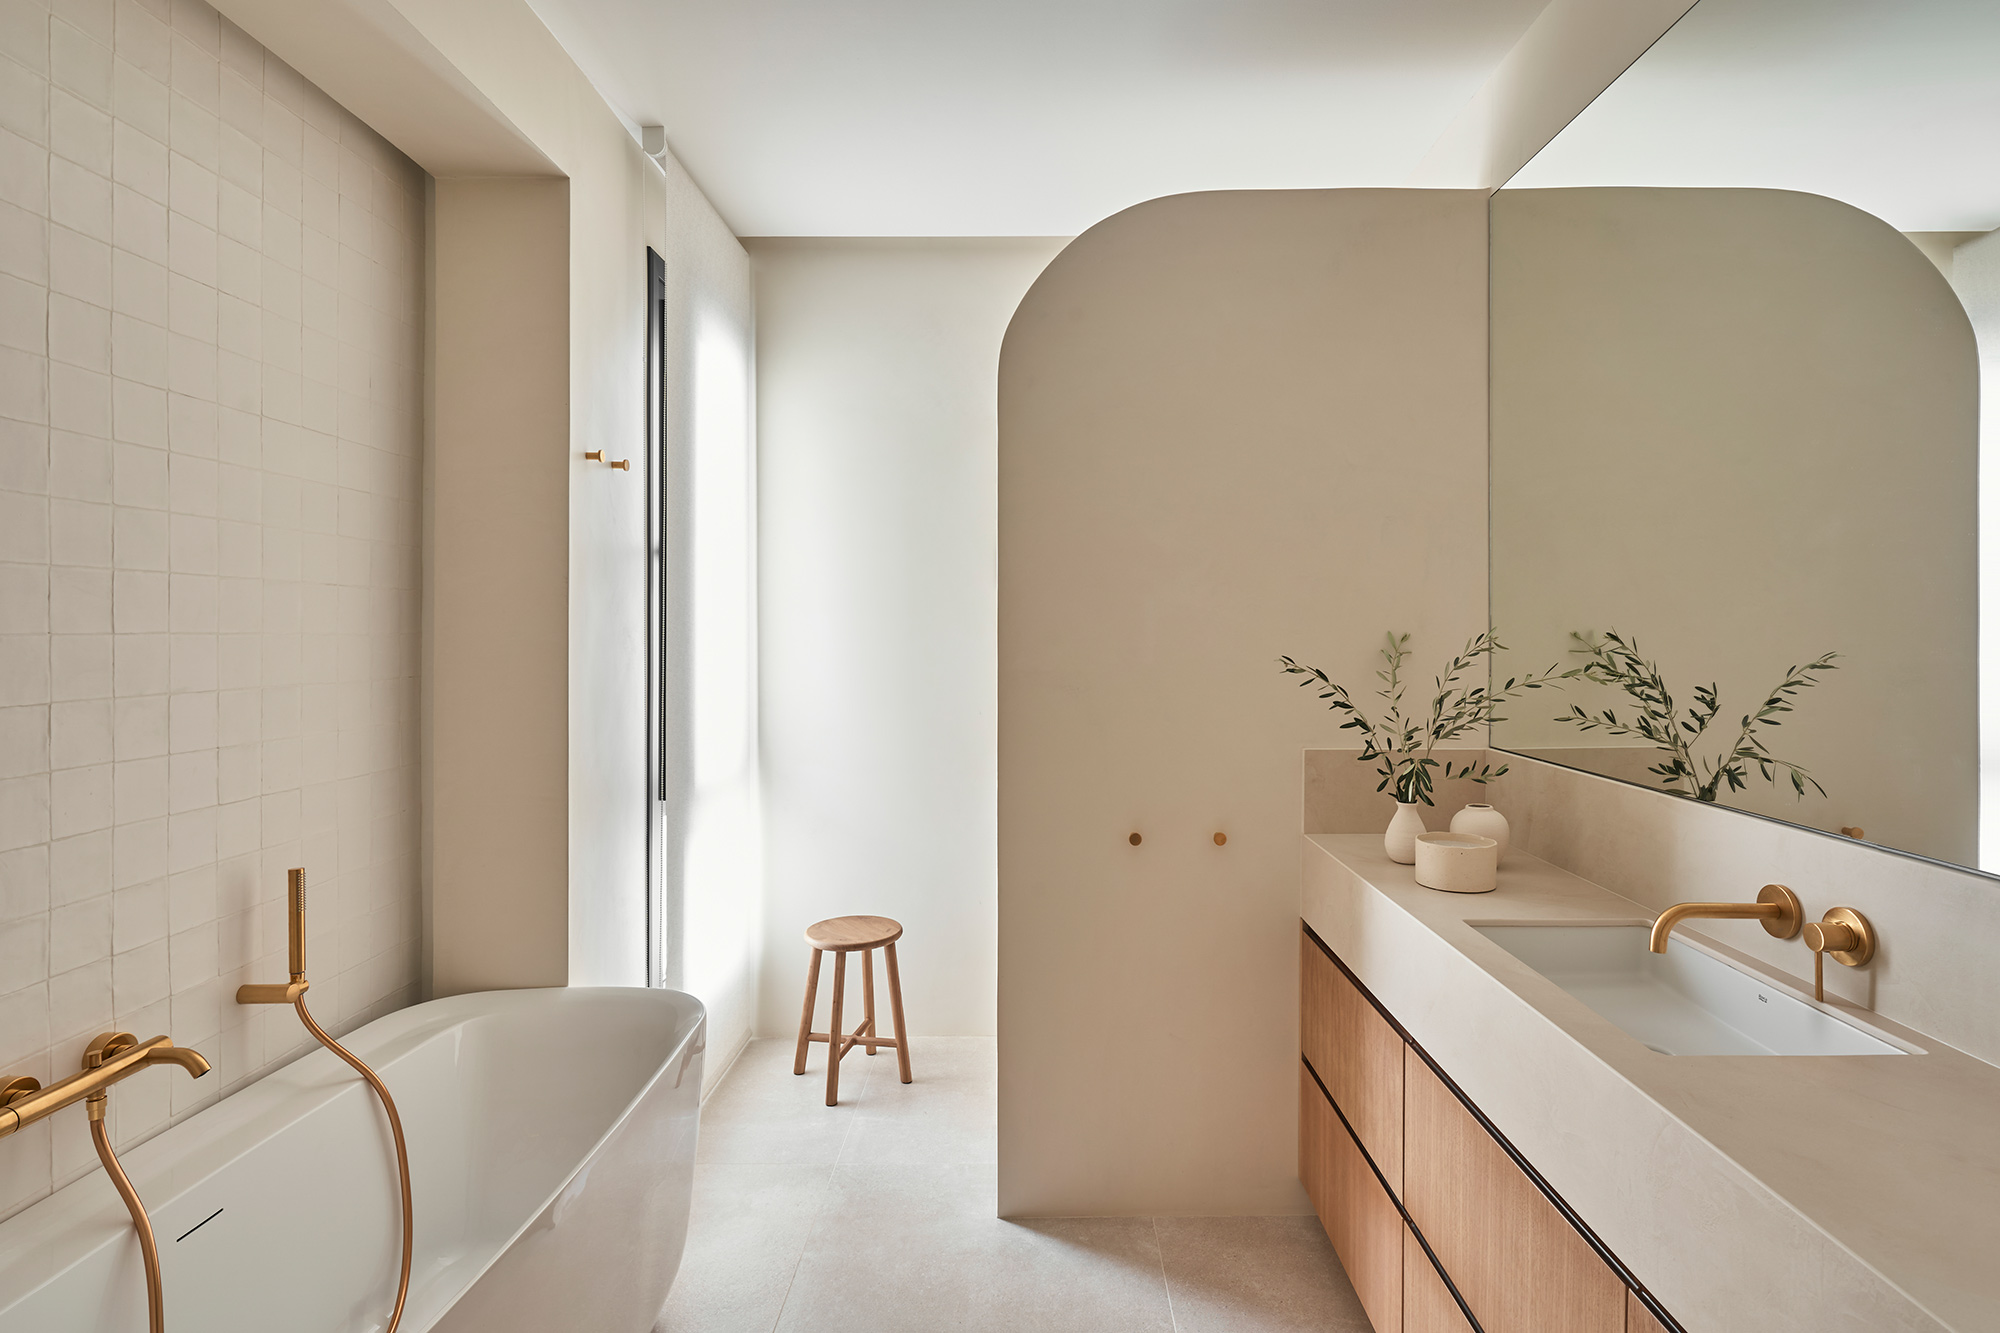 Image of 231107 NOBO ESTUDIO FREGENAL DE LA SIERRA © Javier Bravo 0625 in Cosentino was the perfect solution for the beautiful and functional kitchen and bathrooms in this lovely Sydney home - Cosentino